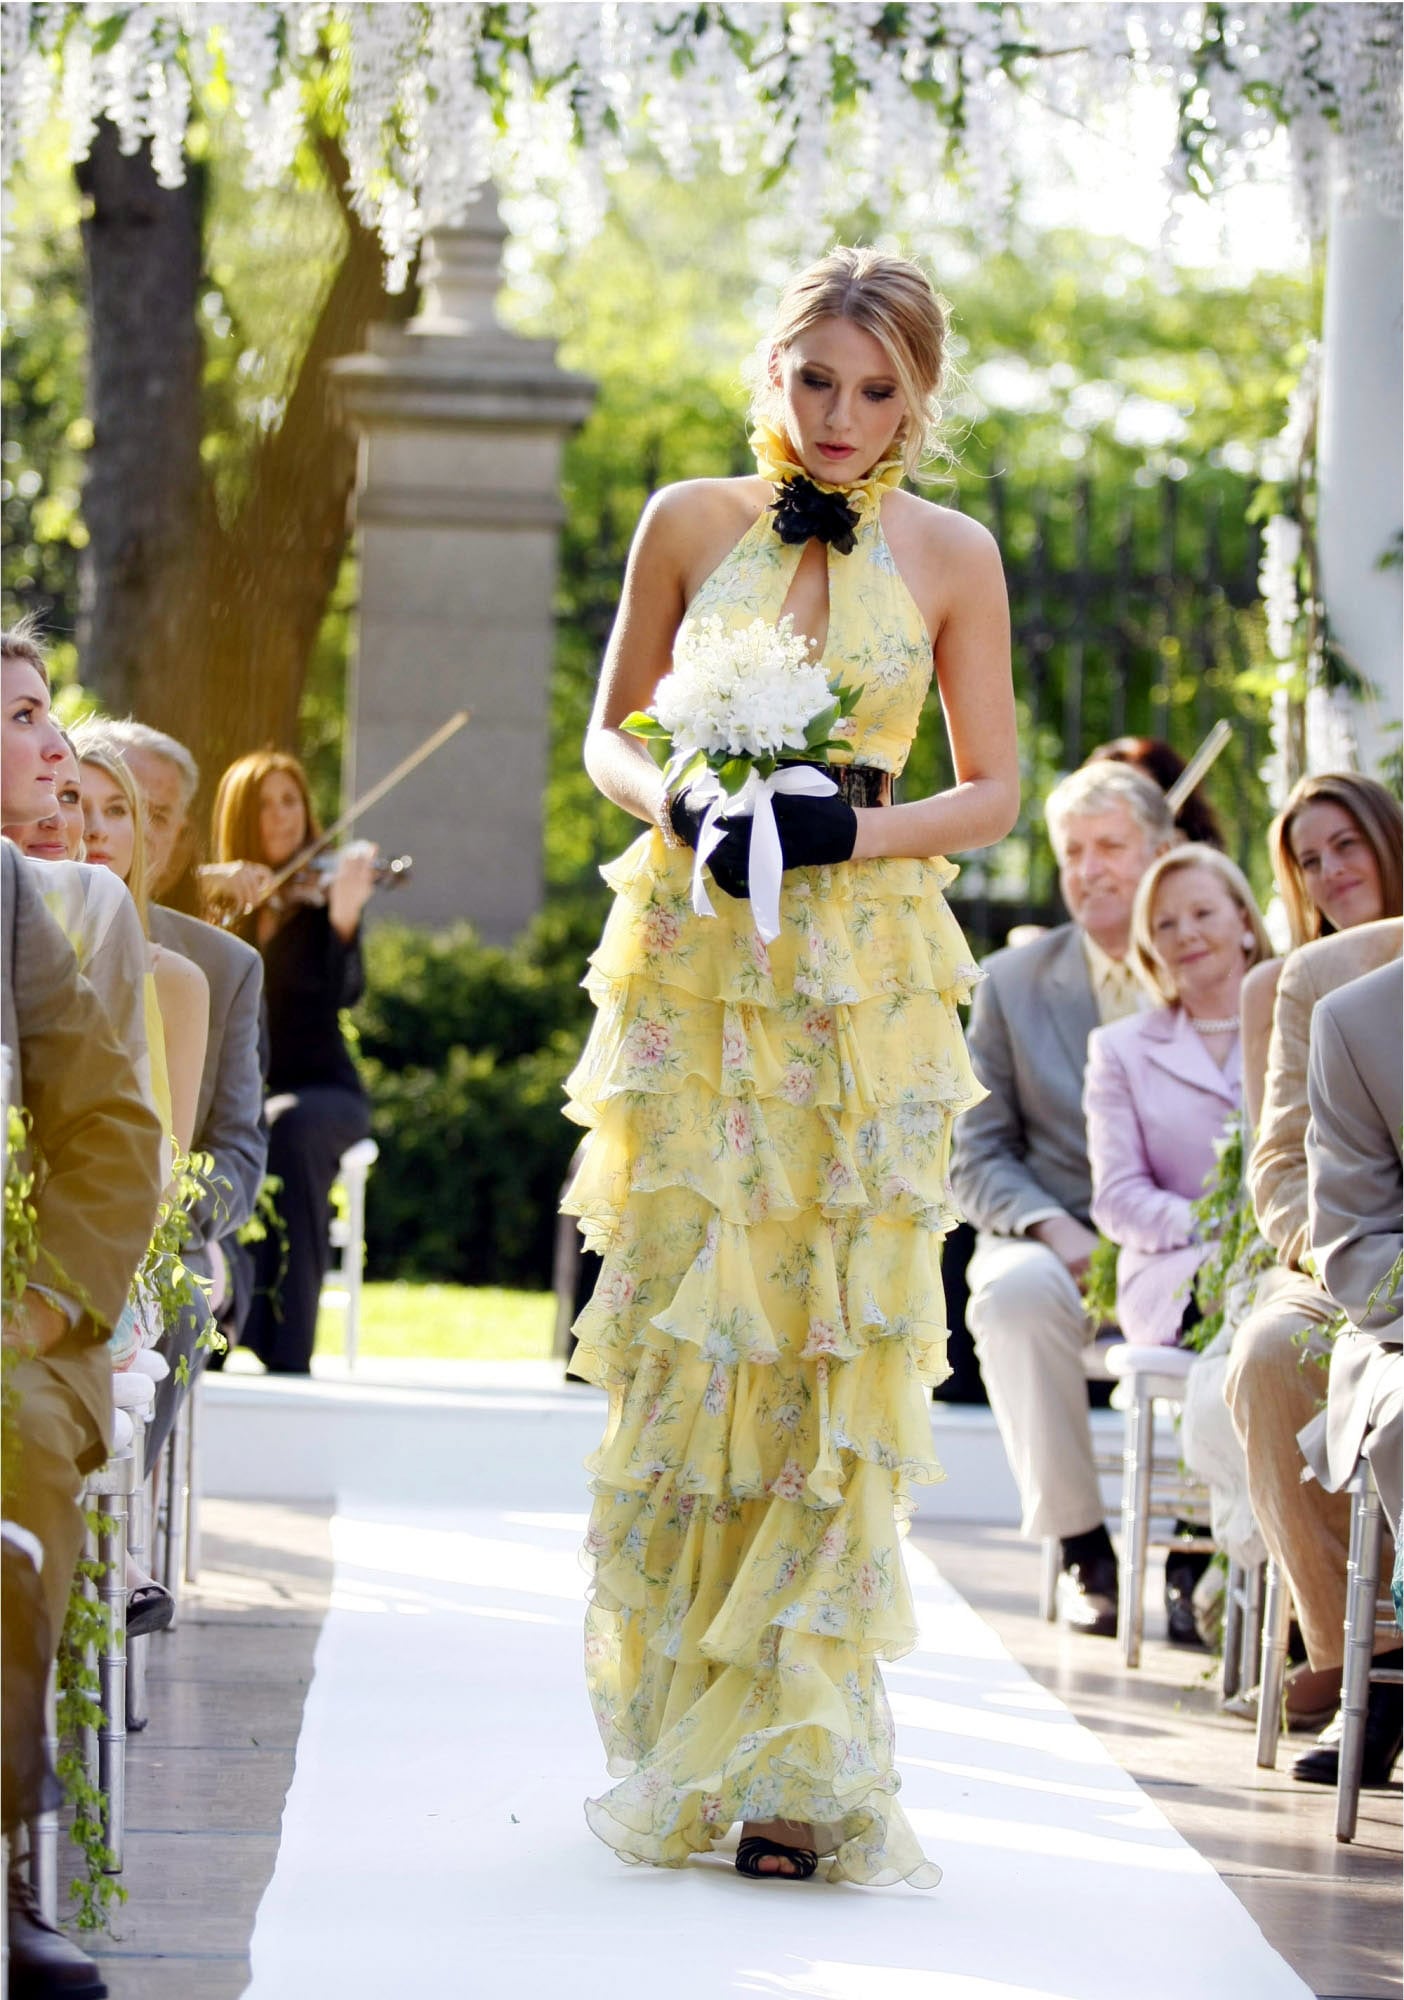 Serena van der Woodsen Wearing a Yellow Halter Dress, 12 Times Blake  Lively Took a Style Cue From Serena van der Woodsen